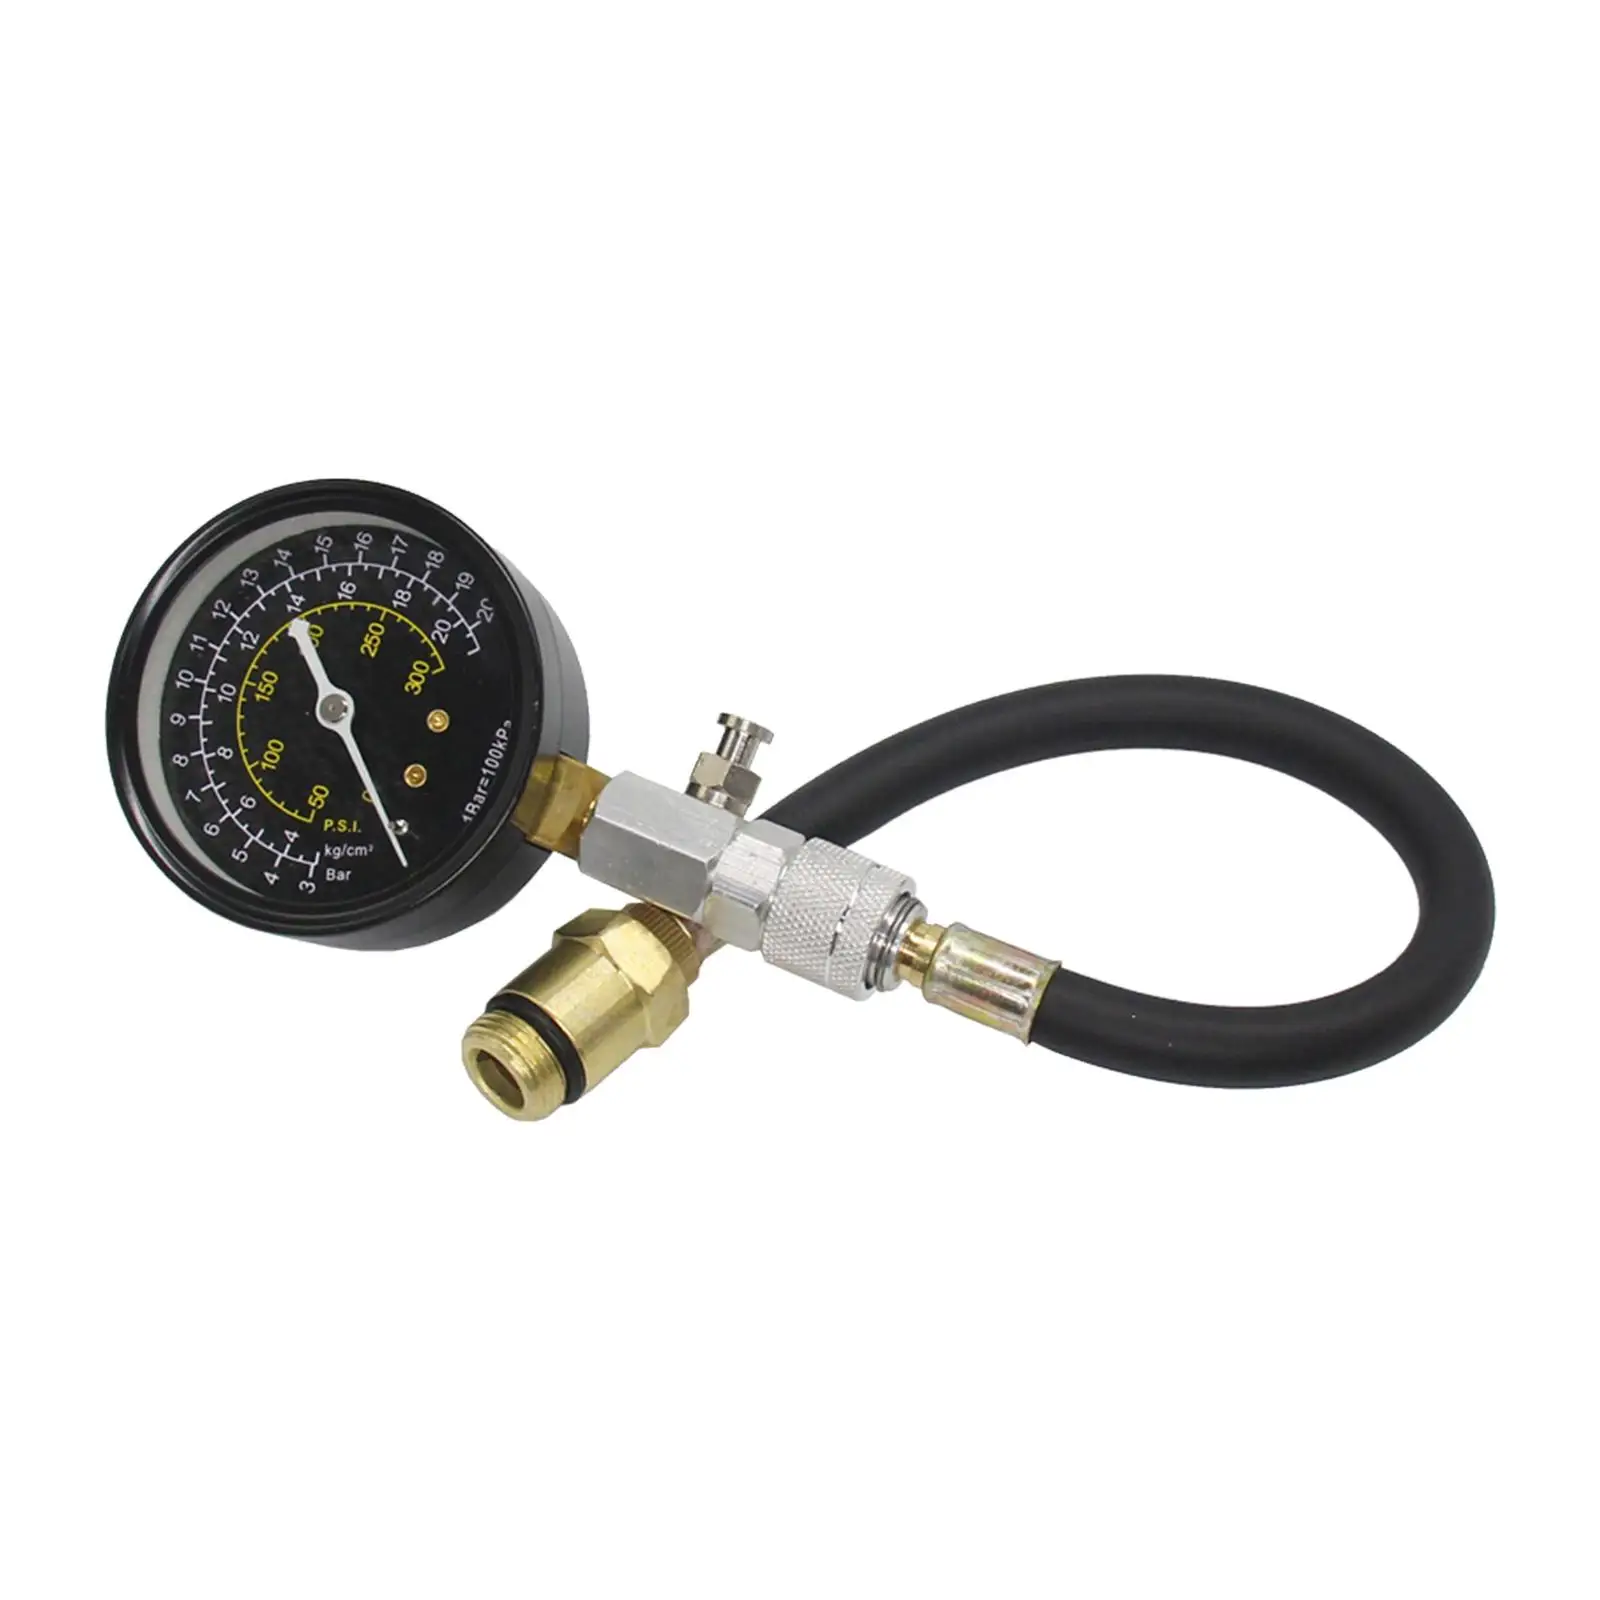 Compression 300 PSI Check Test Meter Auto 2000Kpa Pressure for Motorcycle Gasoline Engines Car Truck